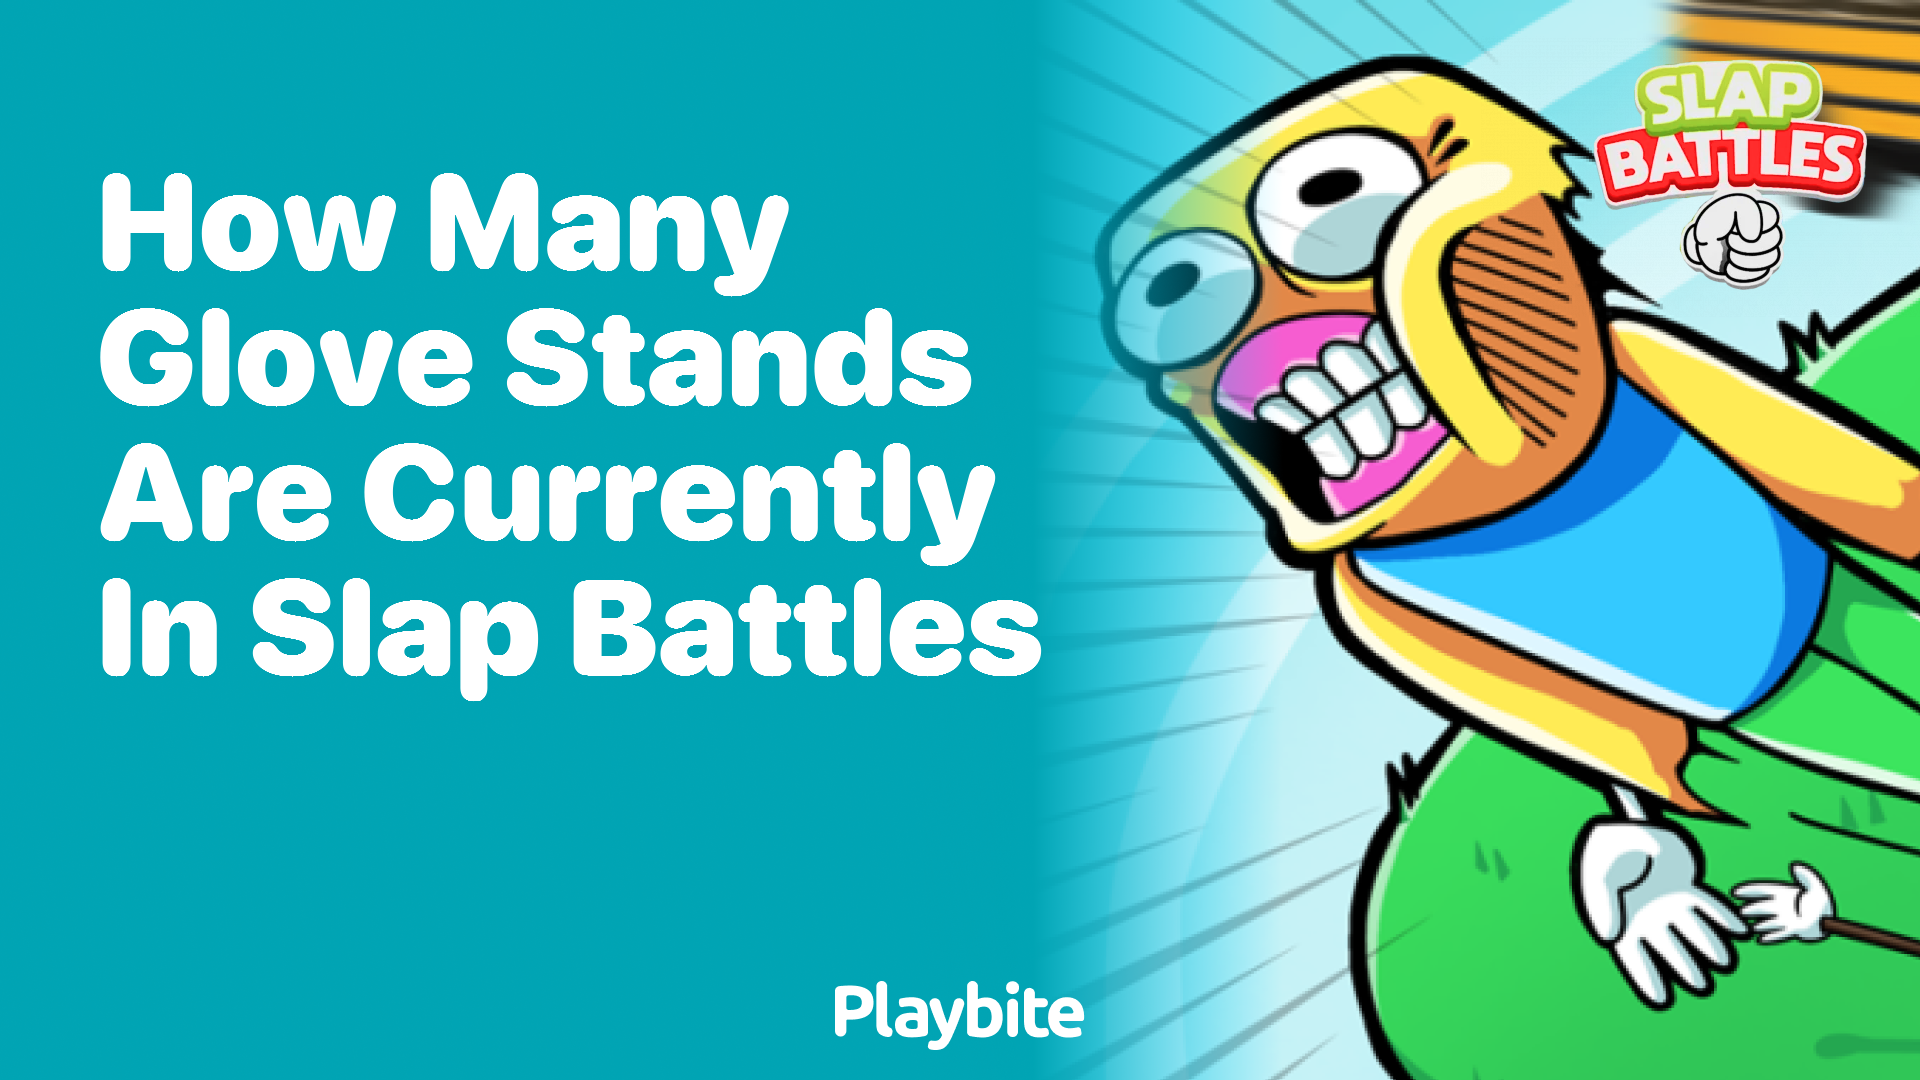 How Many Glove Stands Are Currently in Slap Battles?